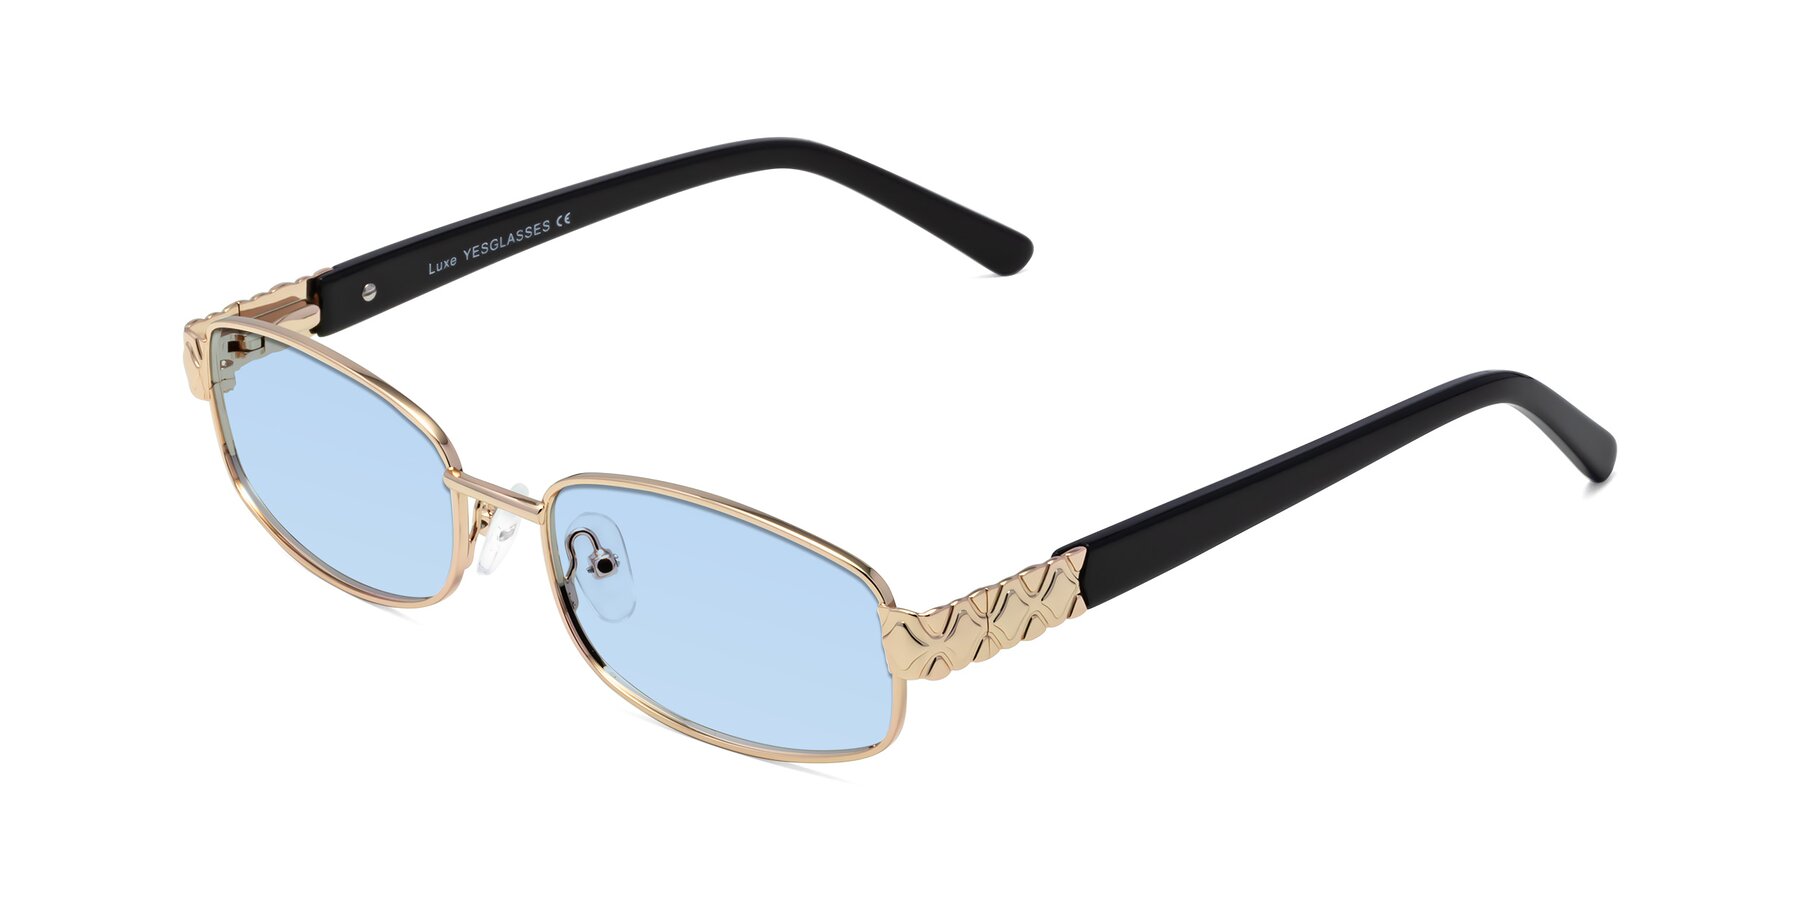 Angle of Luxe in Rose Gold with Light Blue Tinted Lenses